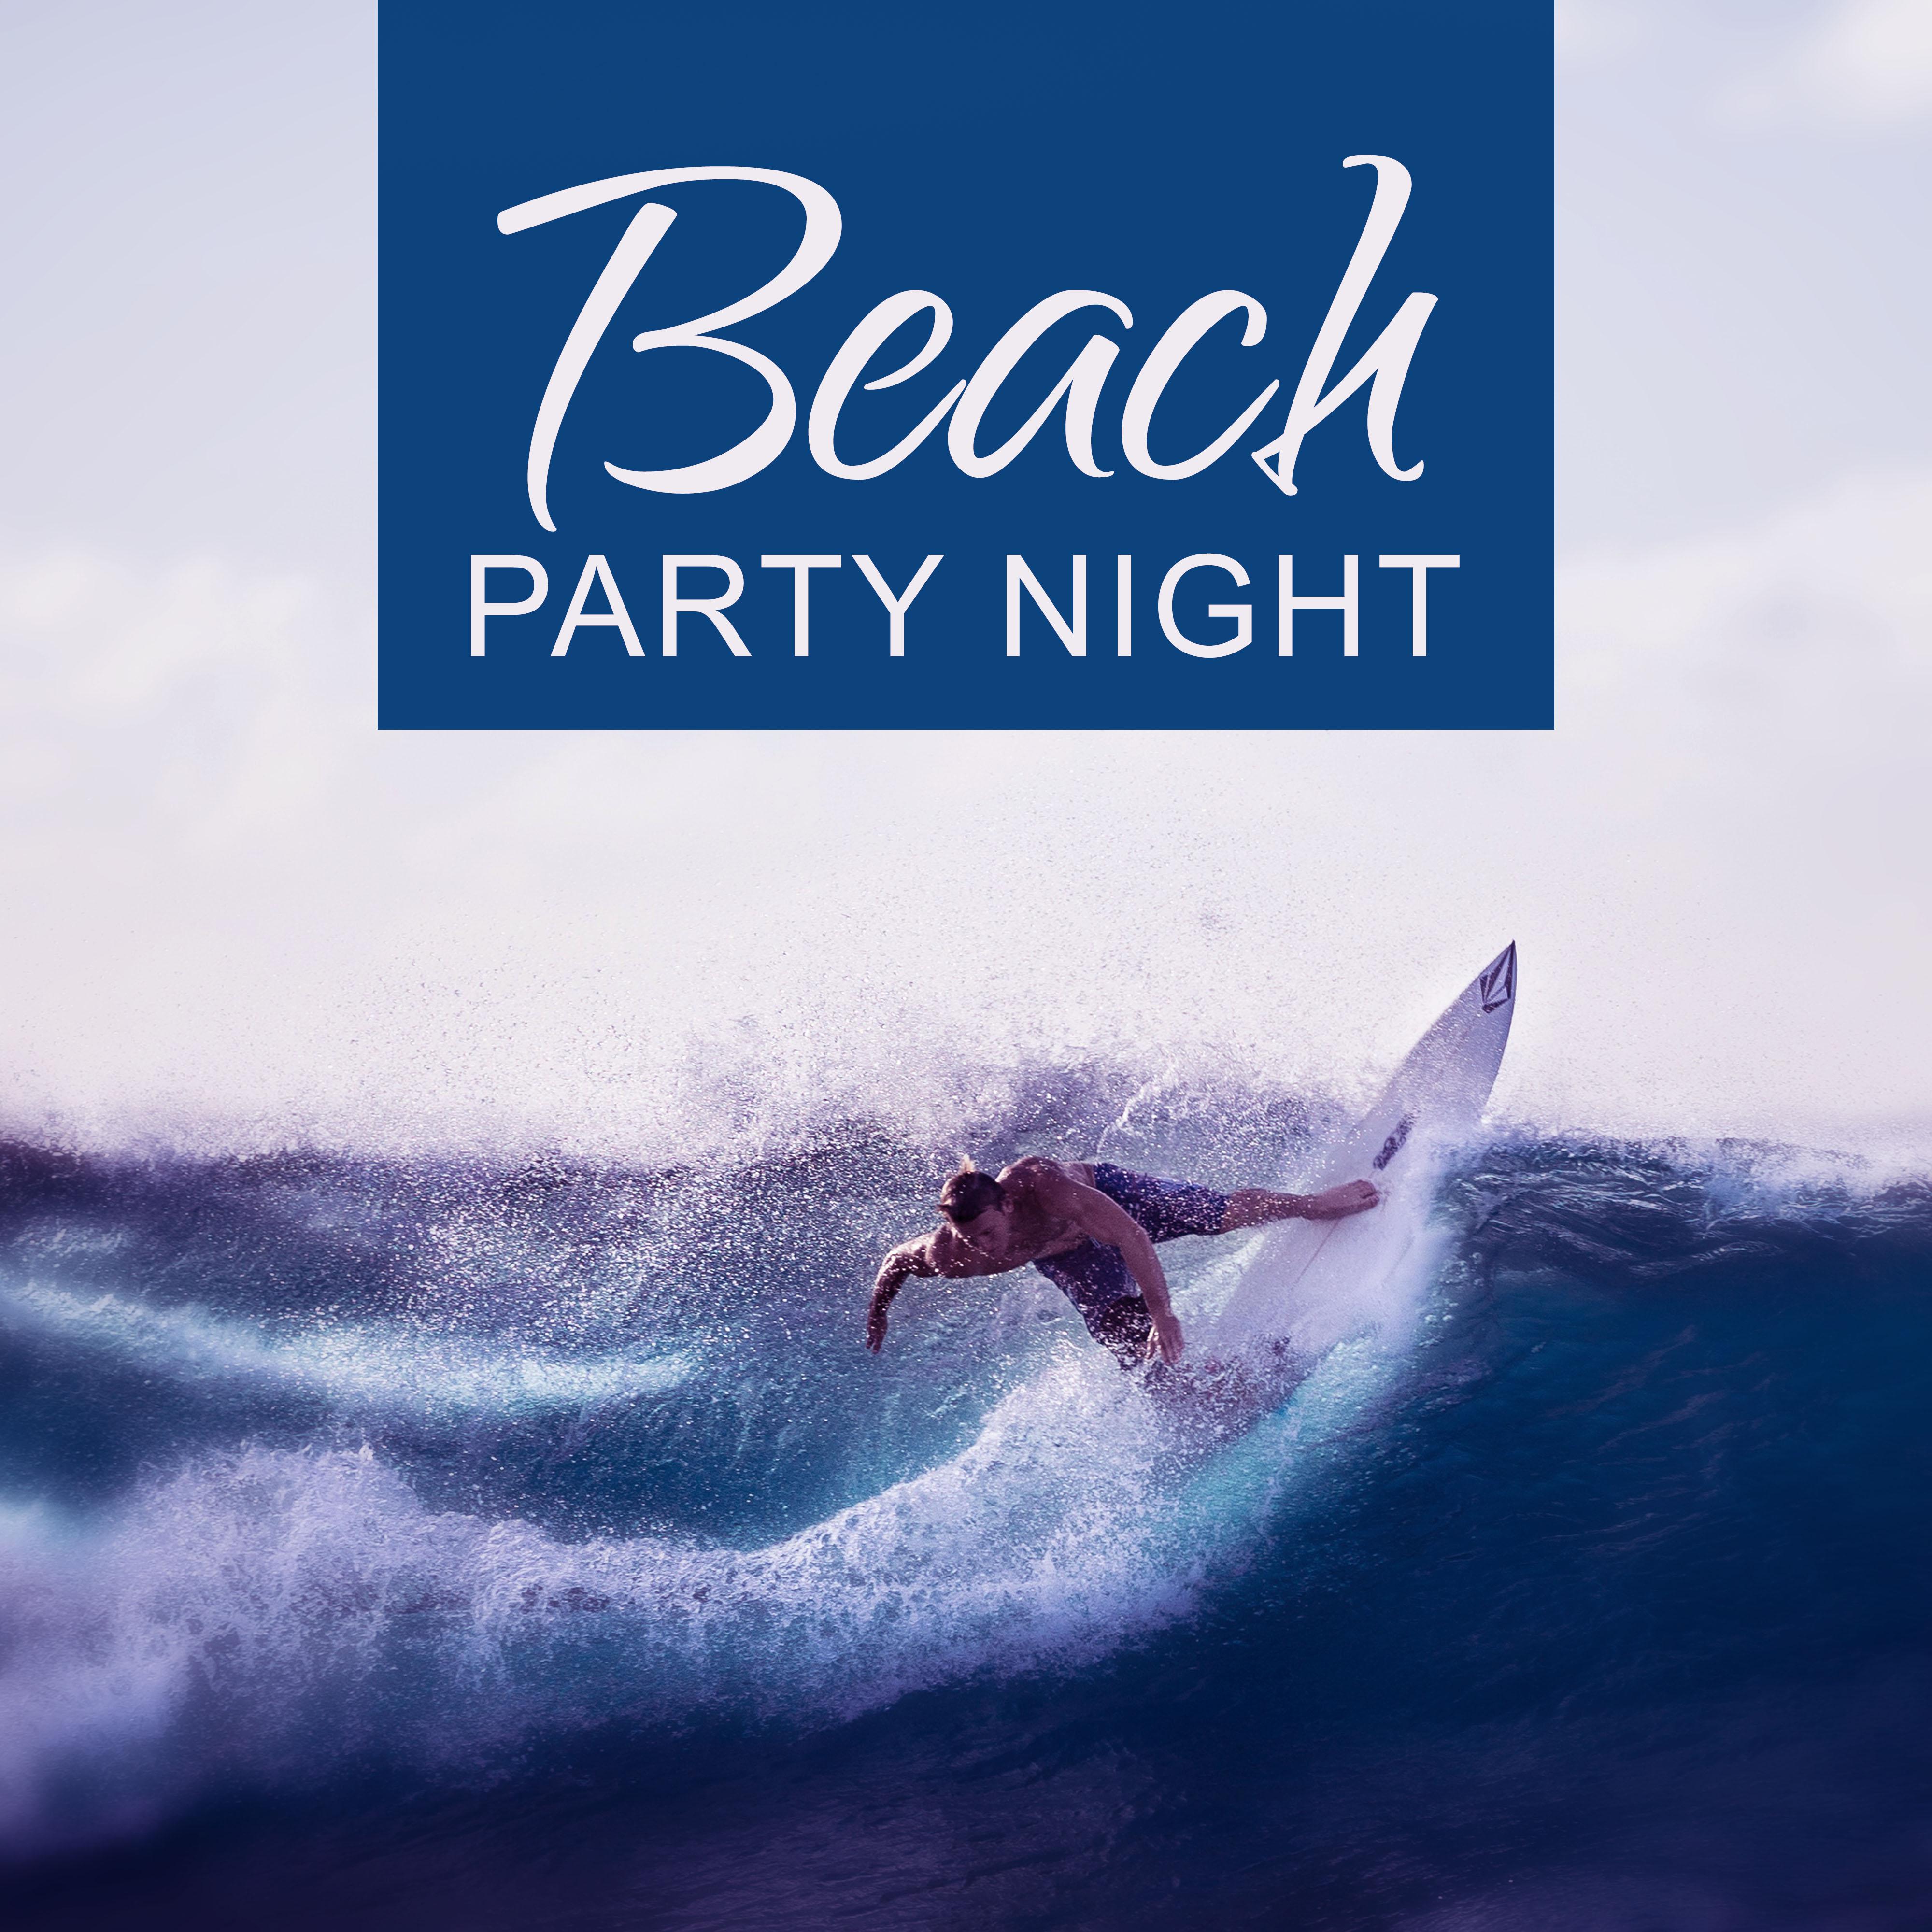 Beach Party Night – Party Time, Long Night, Drinks & Cocktails, Moonlight